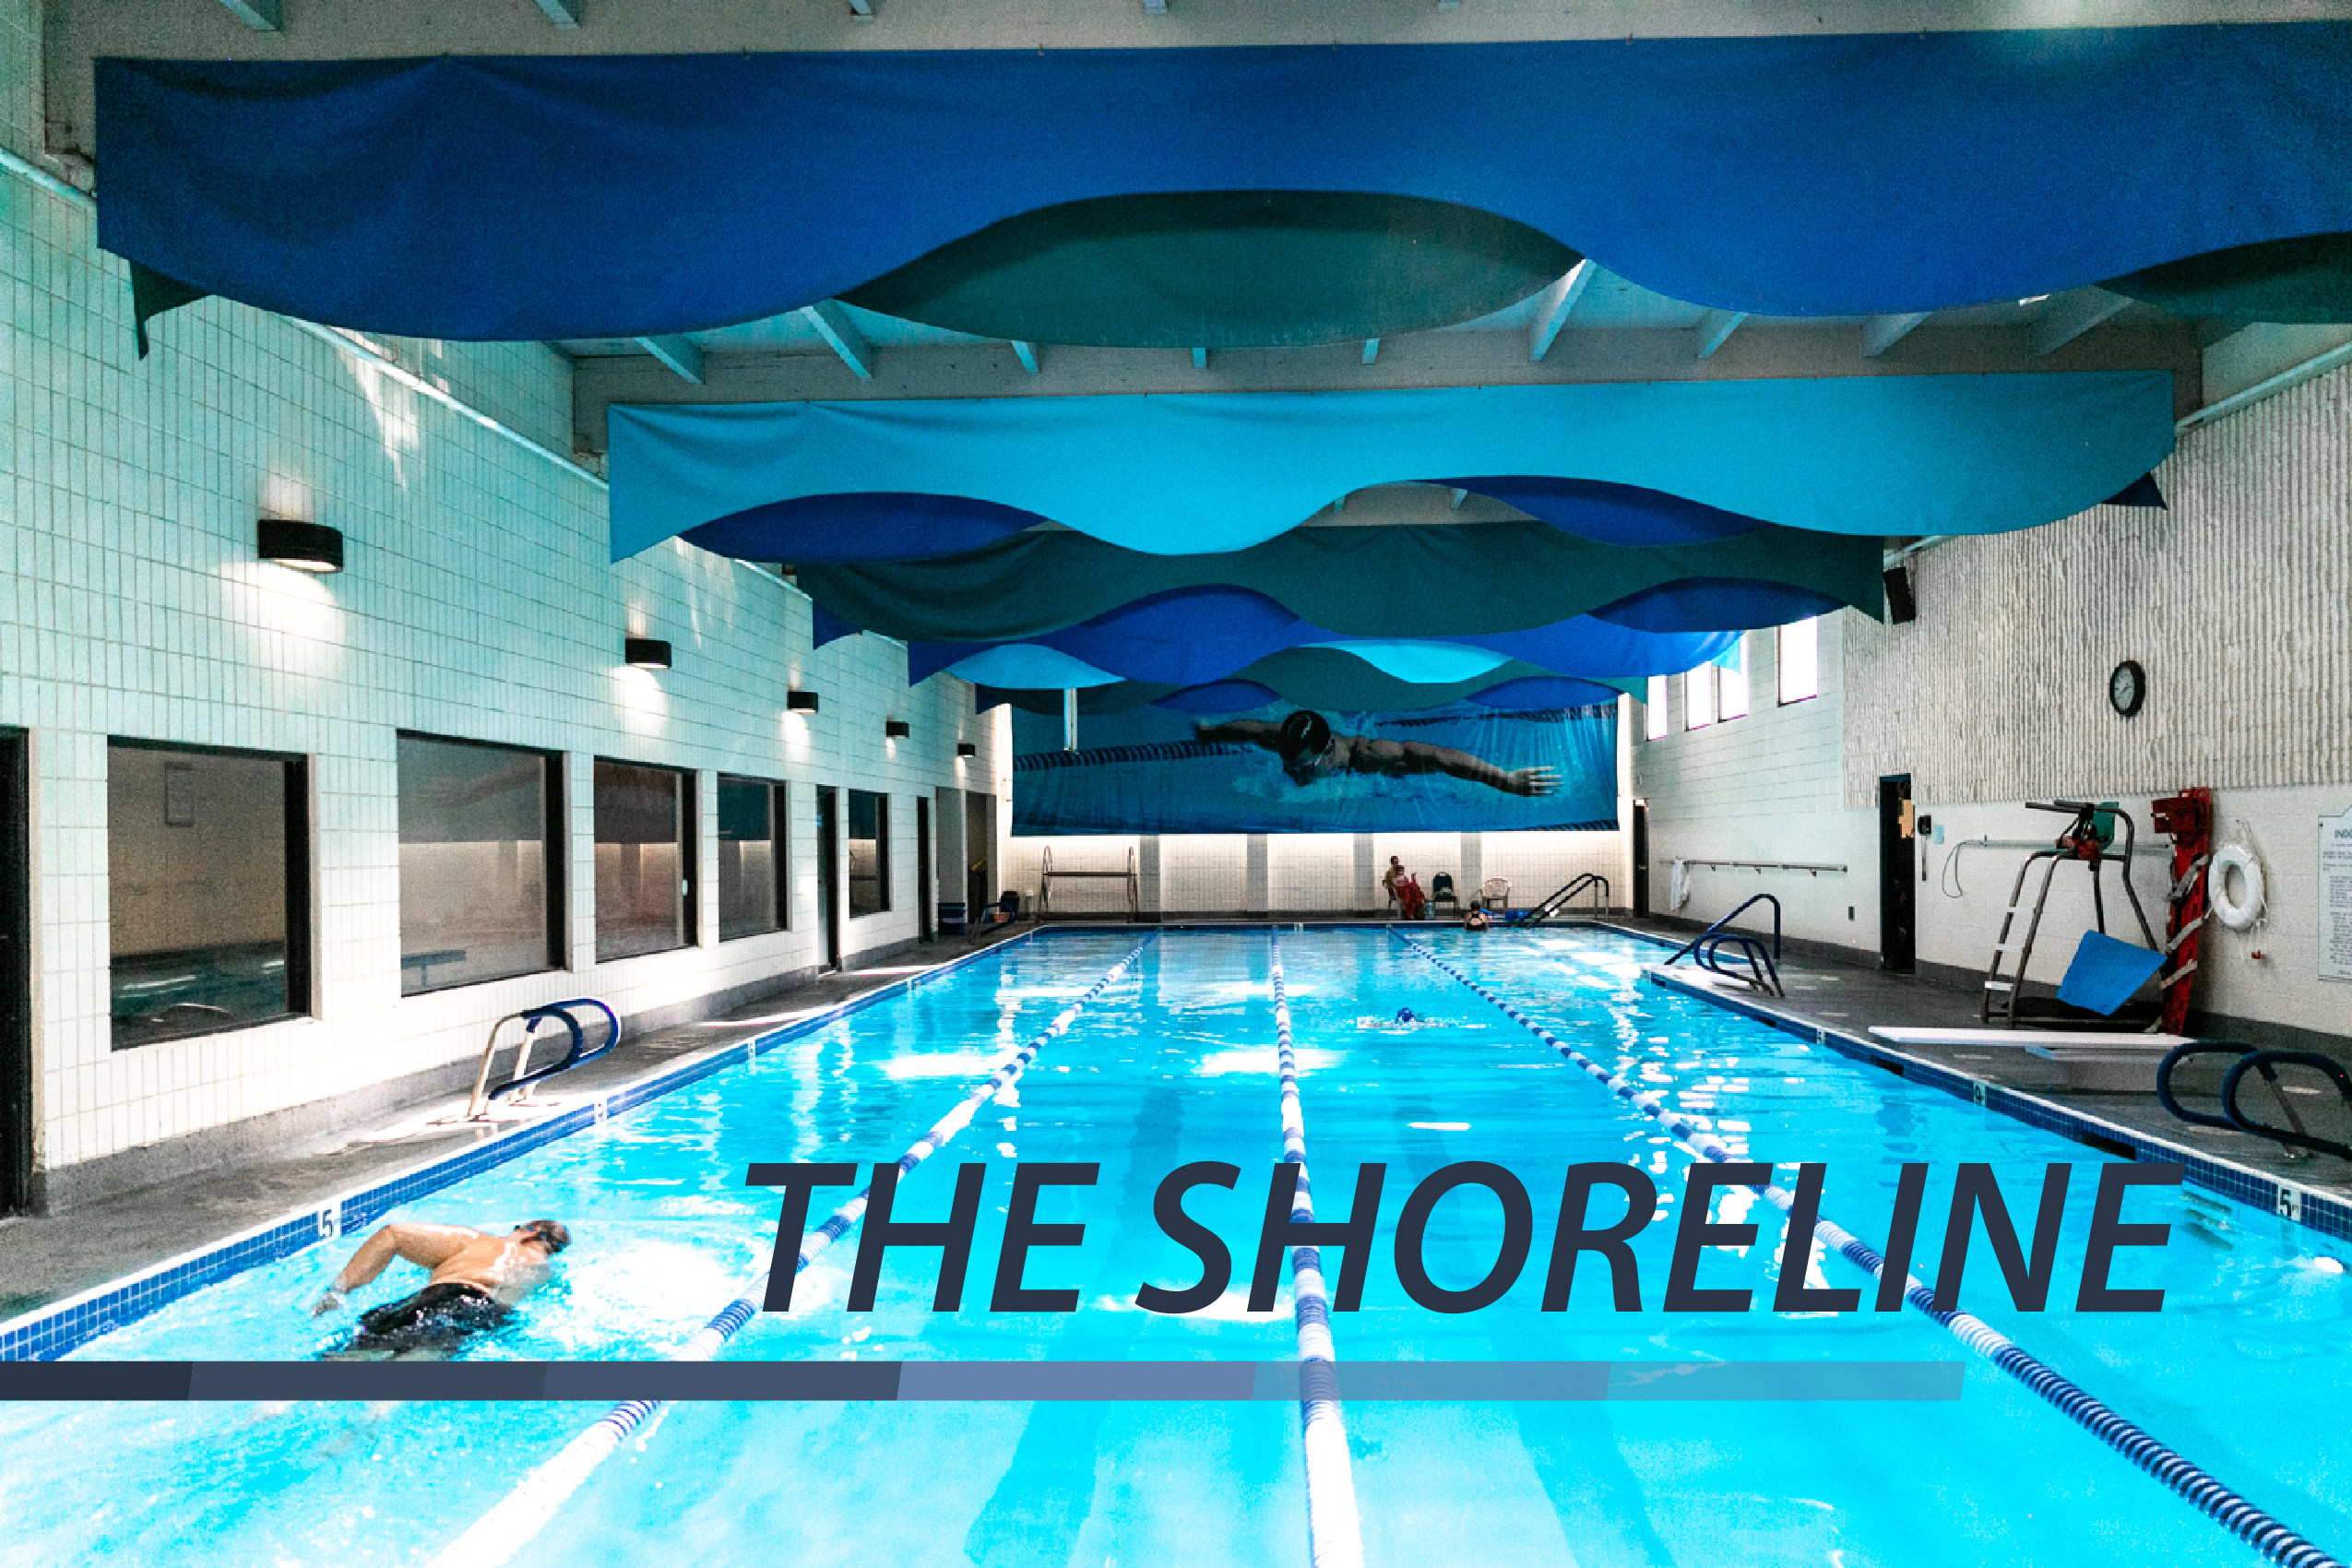 Indoor pool with vibrant blue colors and text on photo saying "The Shoreline."